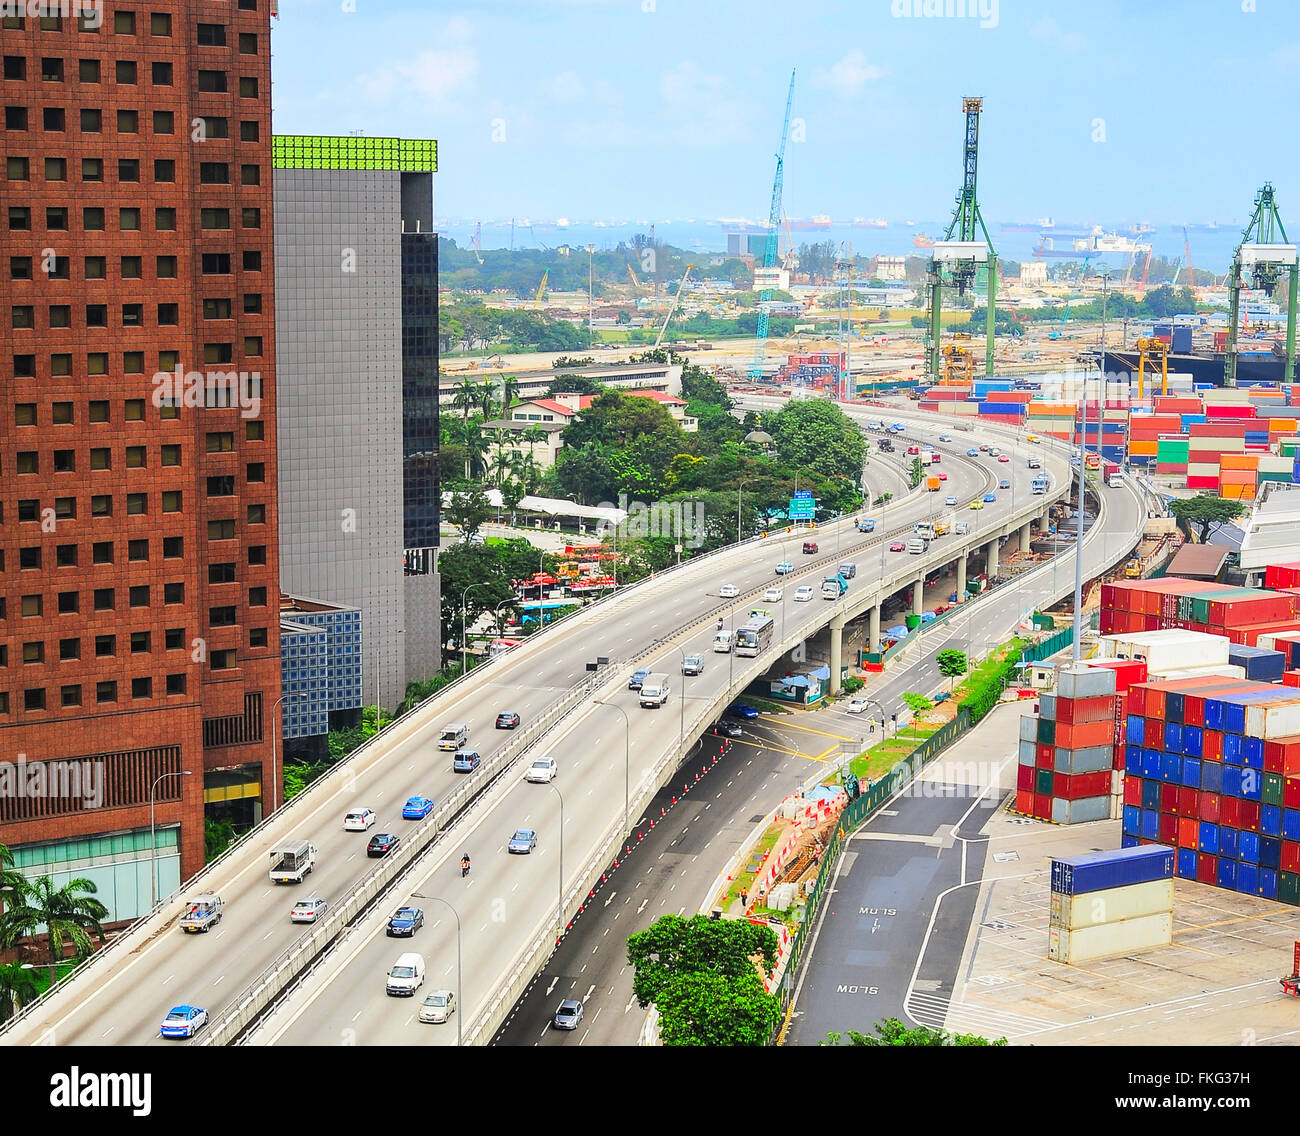 Modern highway and commercial port with many containers in Singapore Stock Photo